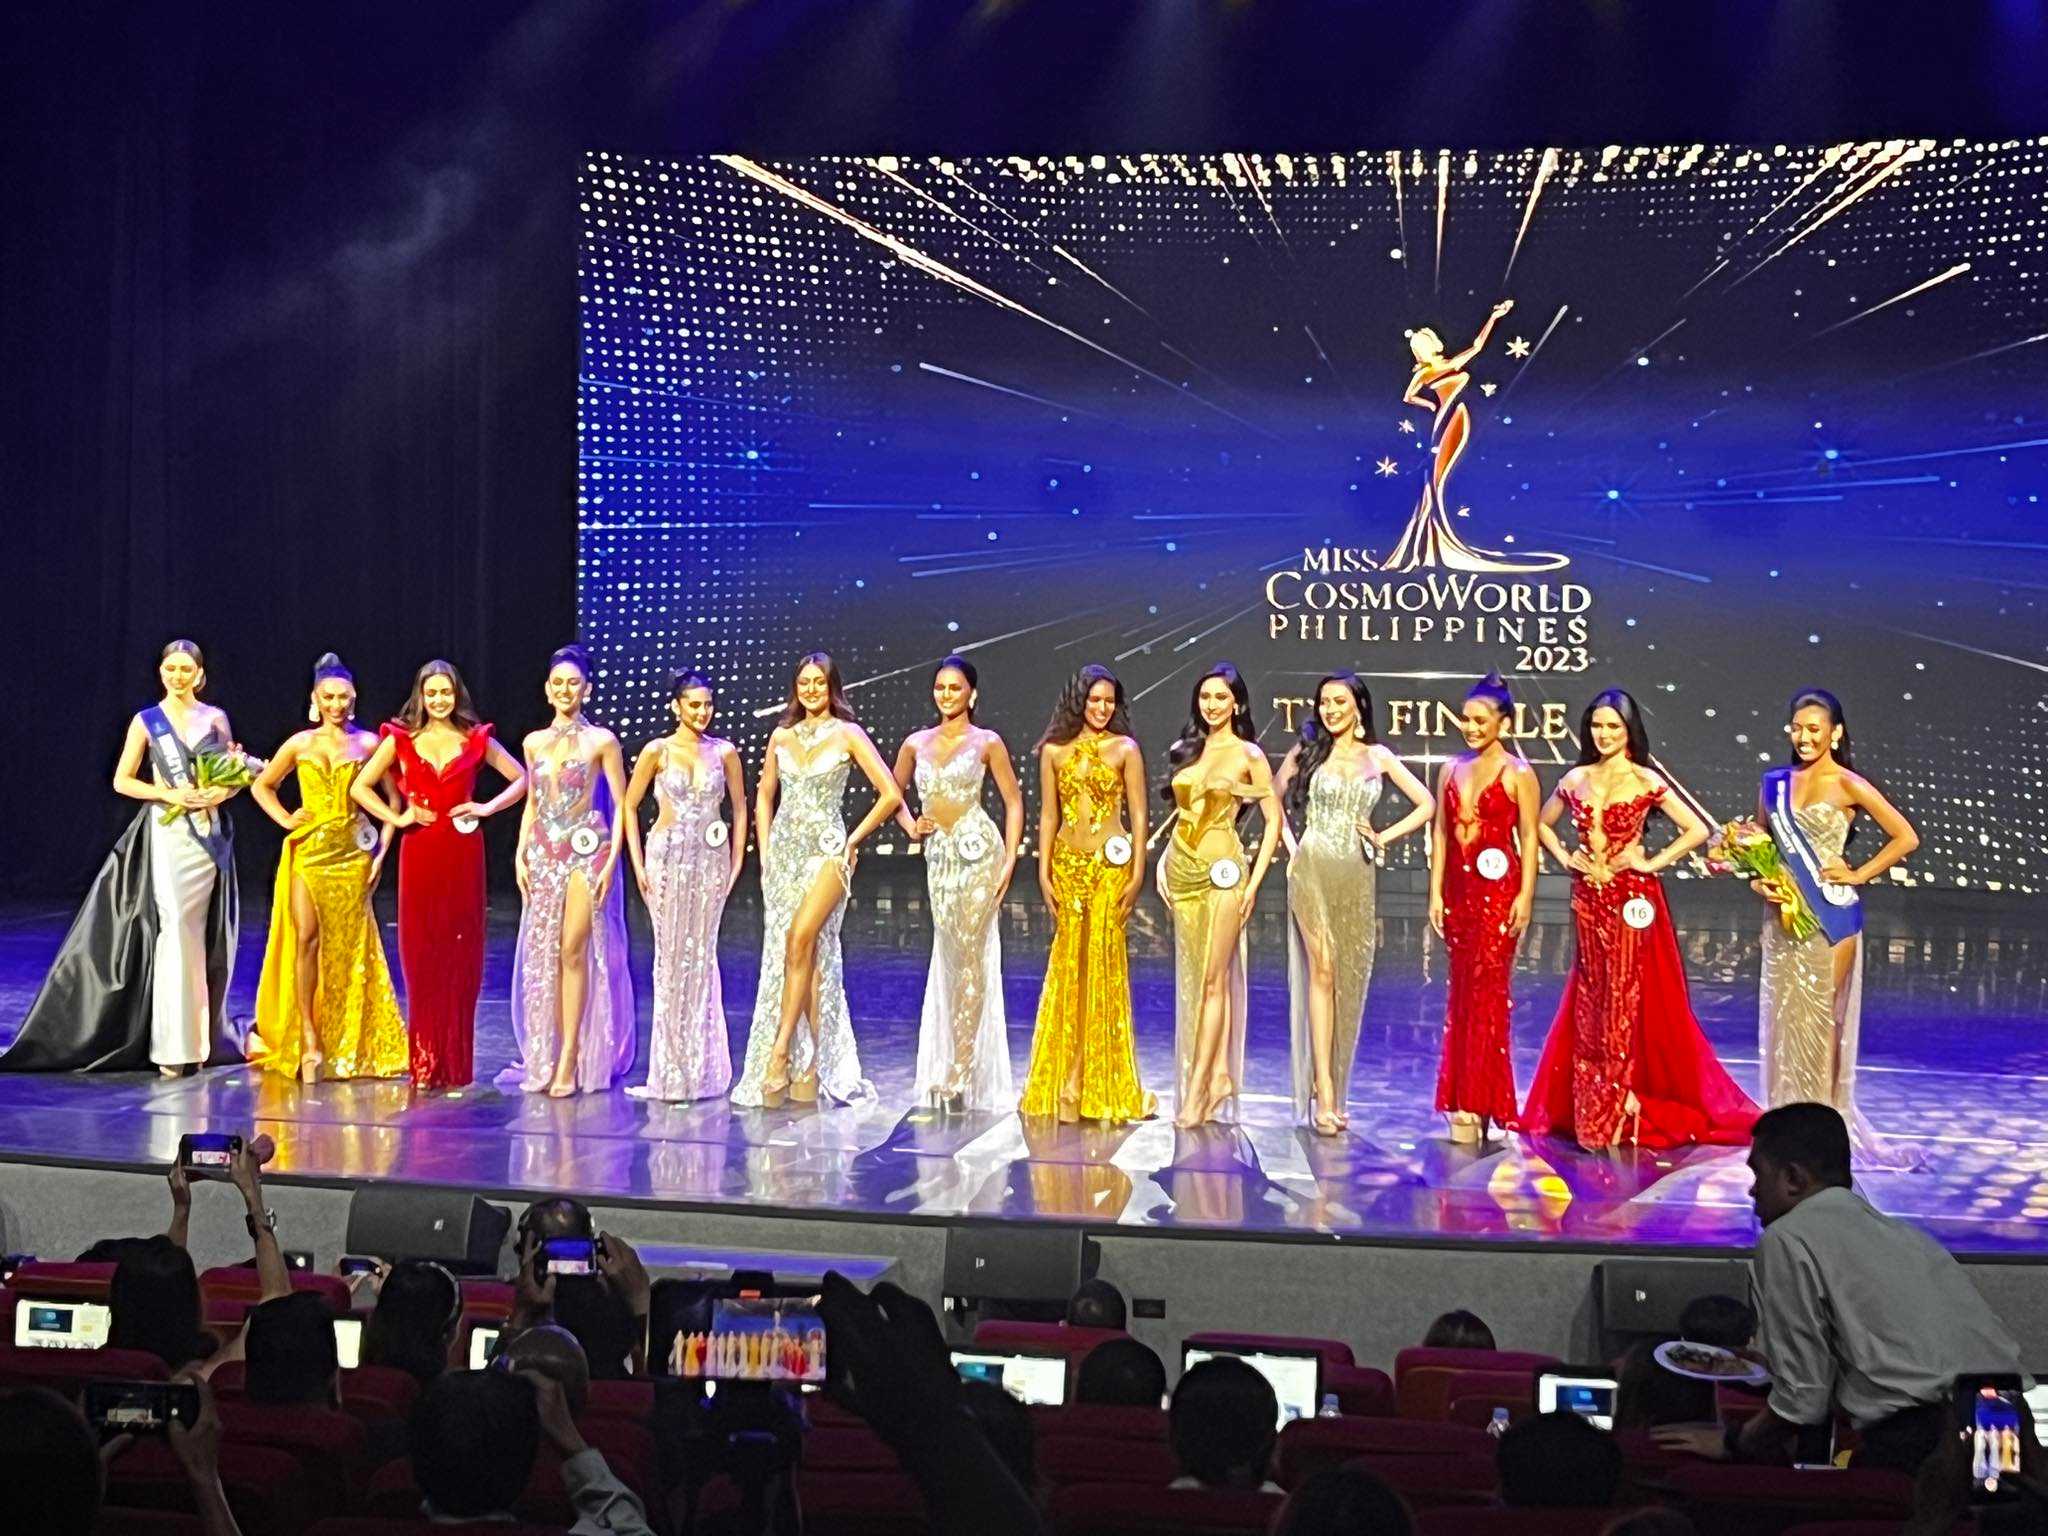 Elda Louise Aznar crowned as Ms. Cosmoworld Philippines 2023